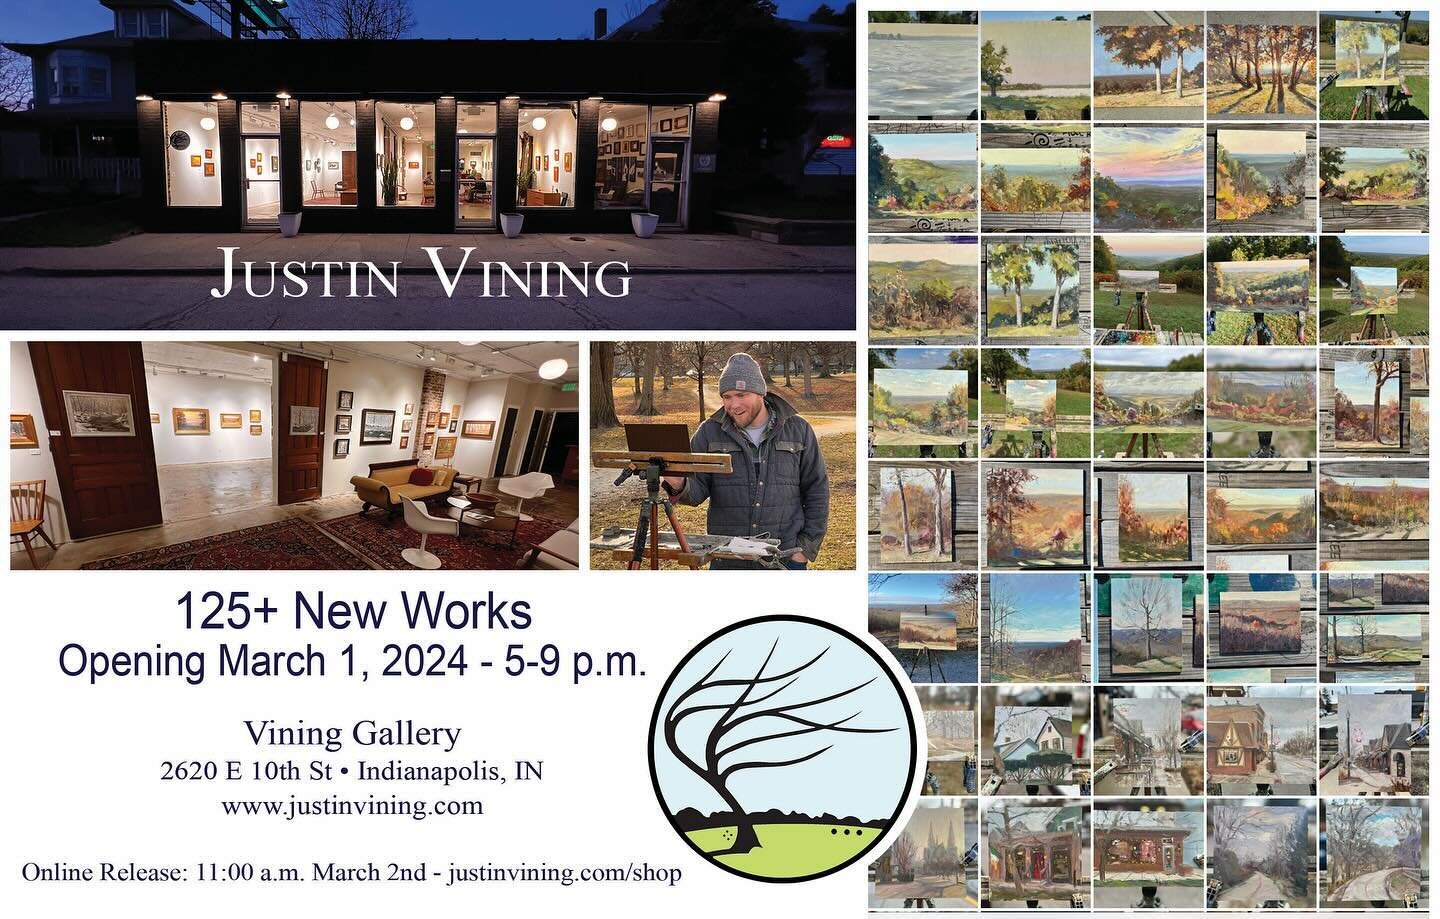 My next solo exhibit of 125+ paintings opens on March 1st, 5-9pm! If you are unable to make it in person, the show will go for sale online at 11:00 am, March 2nd. Link in bio. #pleinair #pleinairpainter #indianapolis #indianapolisartist #historicirvi